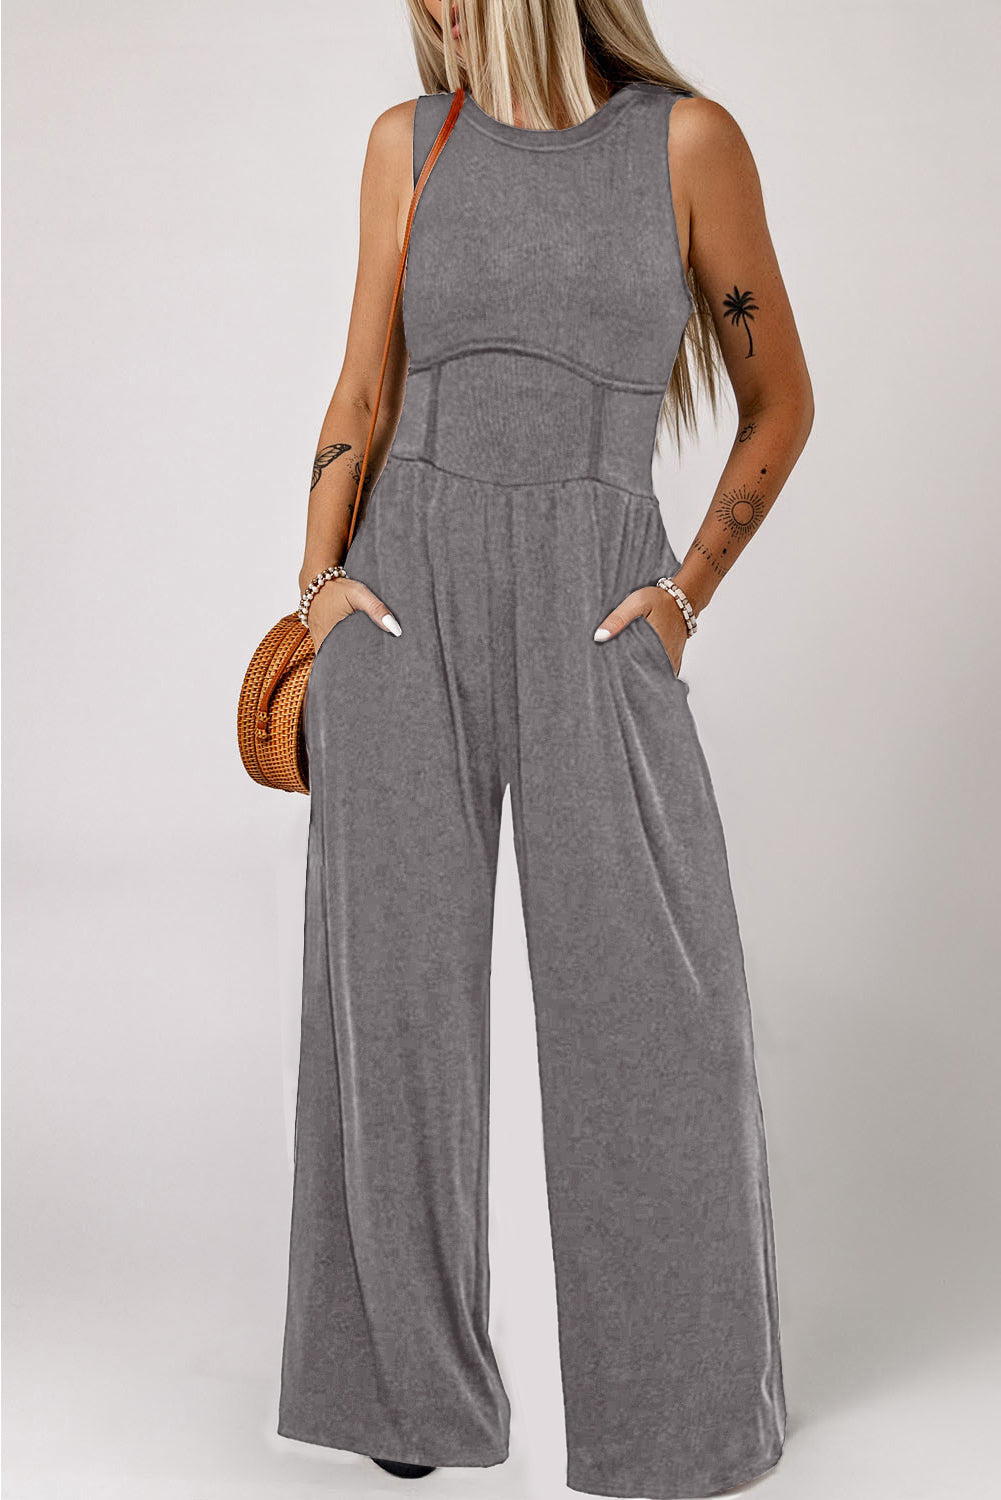 Keeping It Together Jumpsuit with Pockets